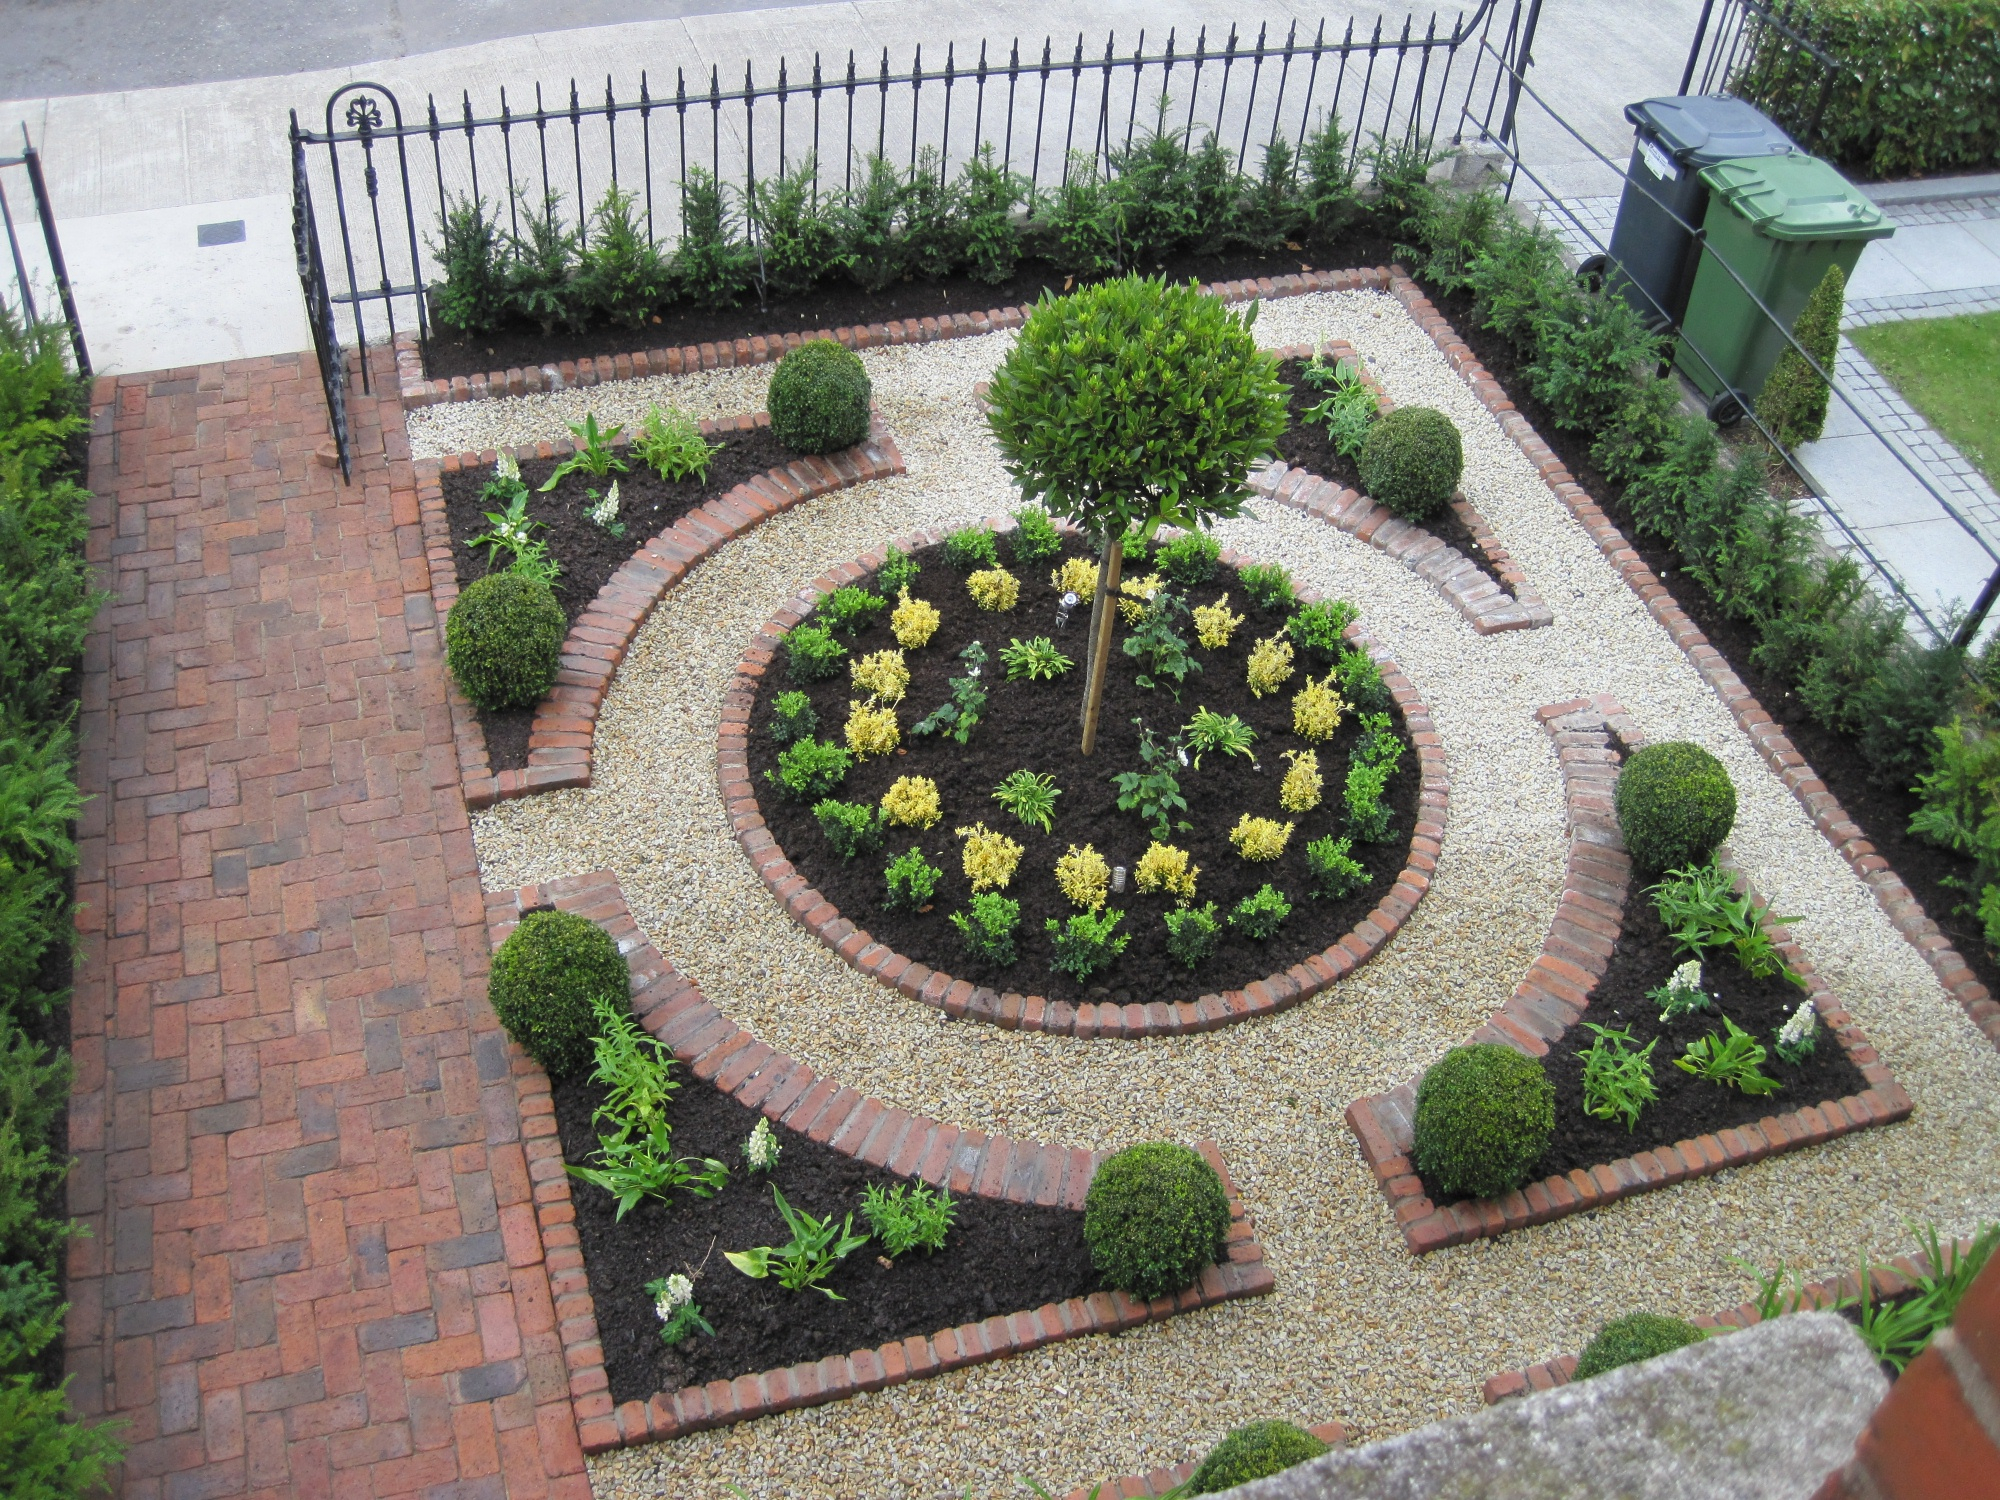 A Small Garden Victory, a Formal Plan - Making it Lovely